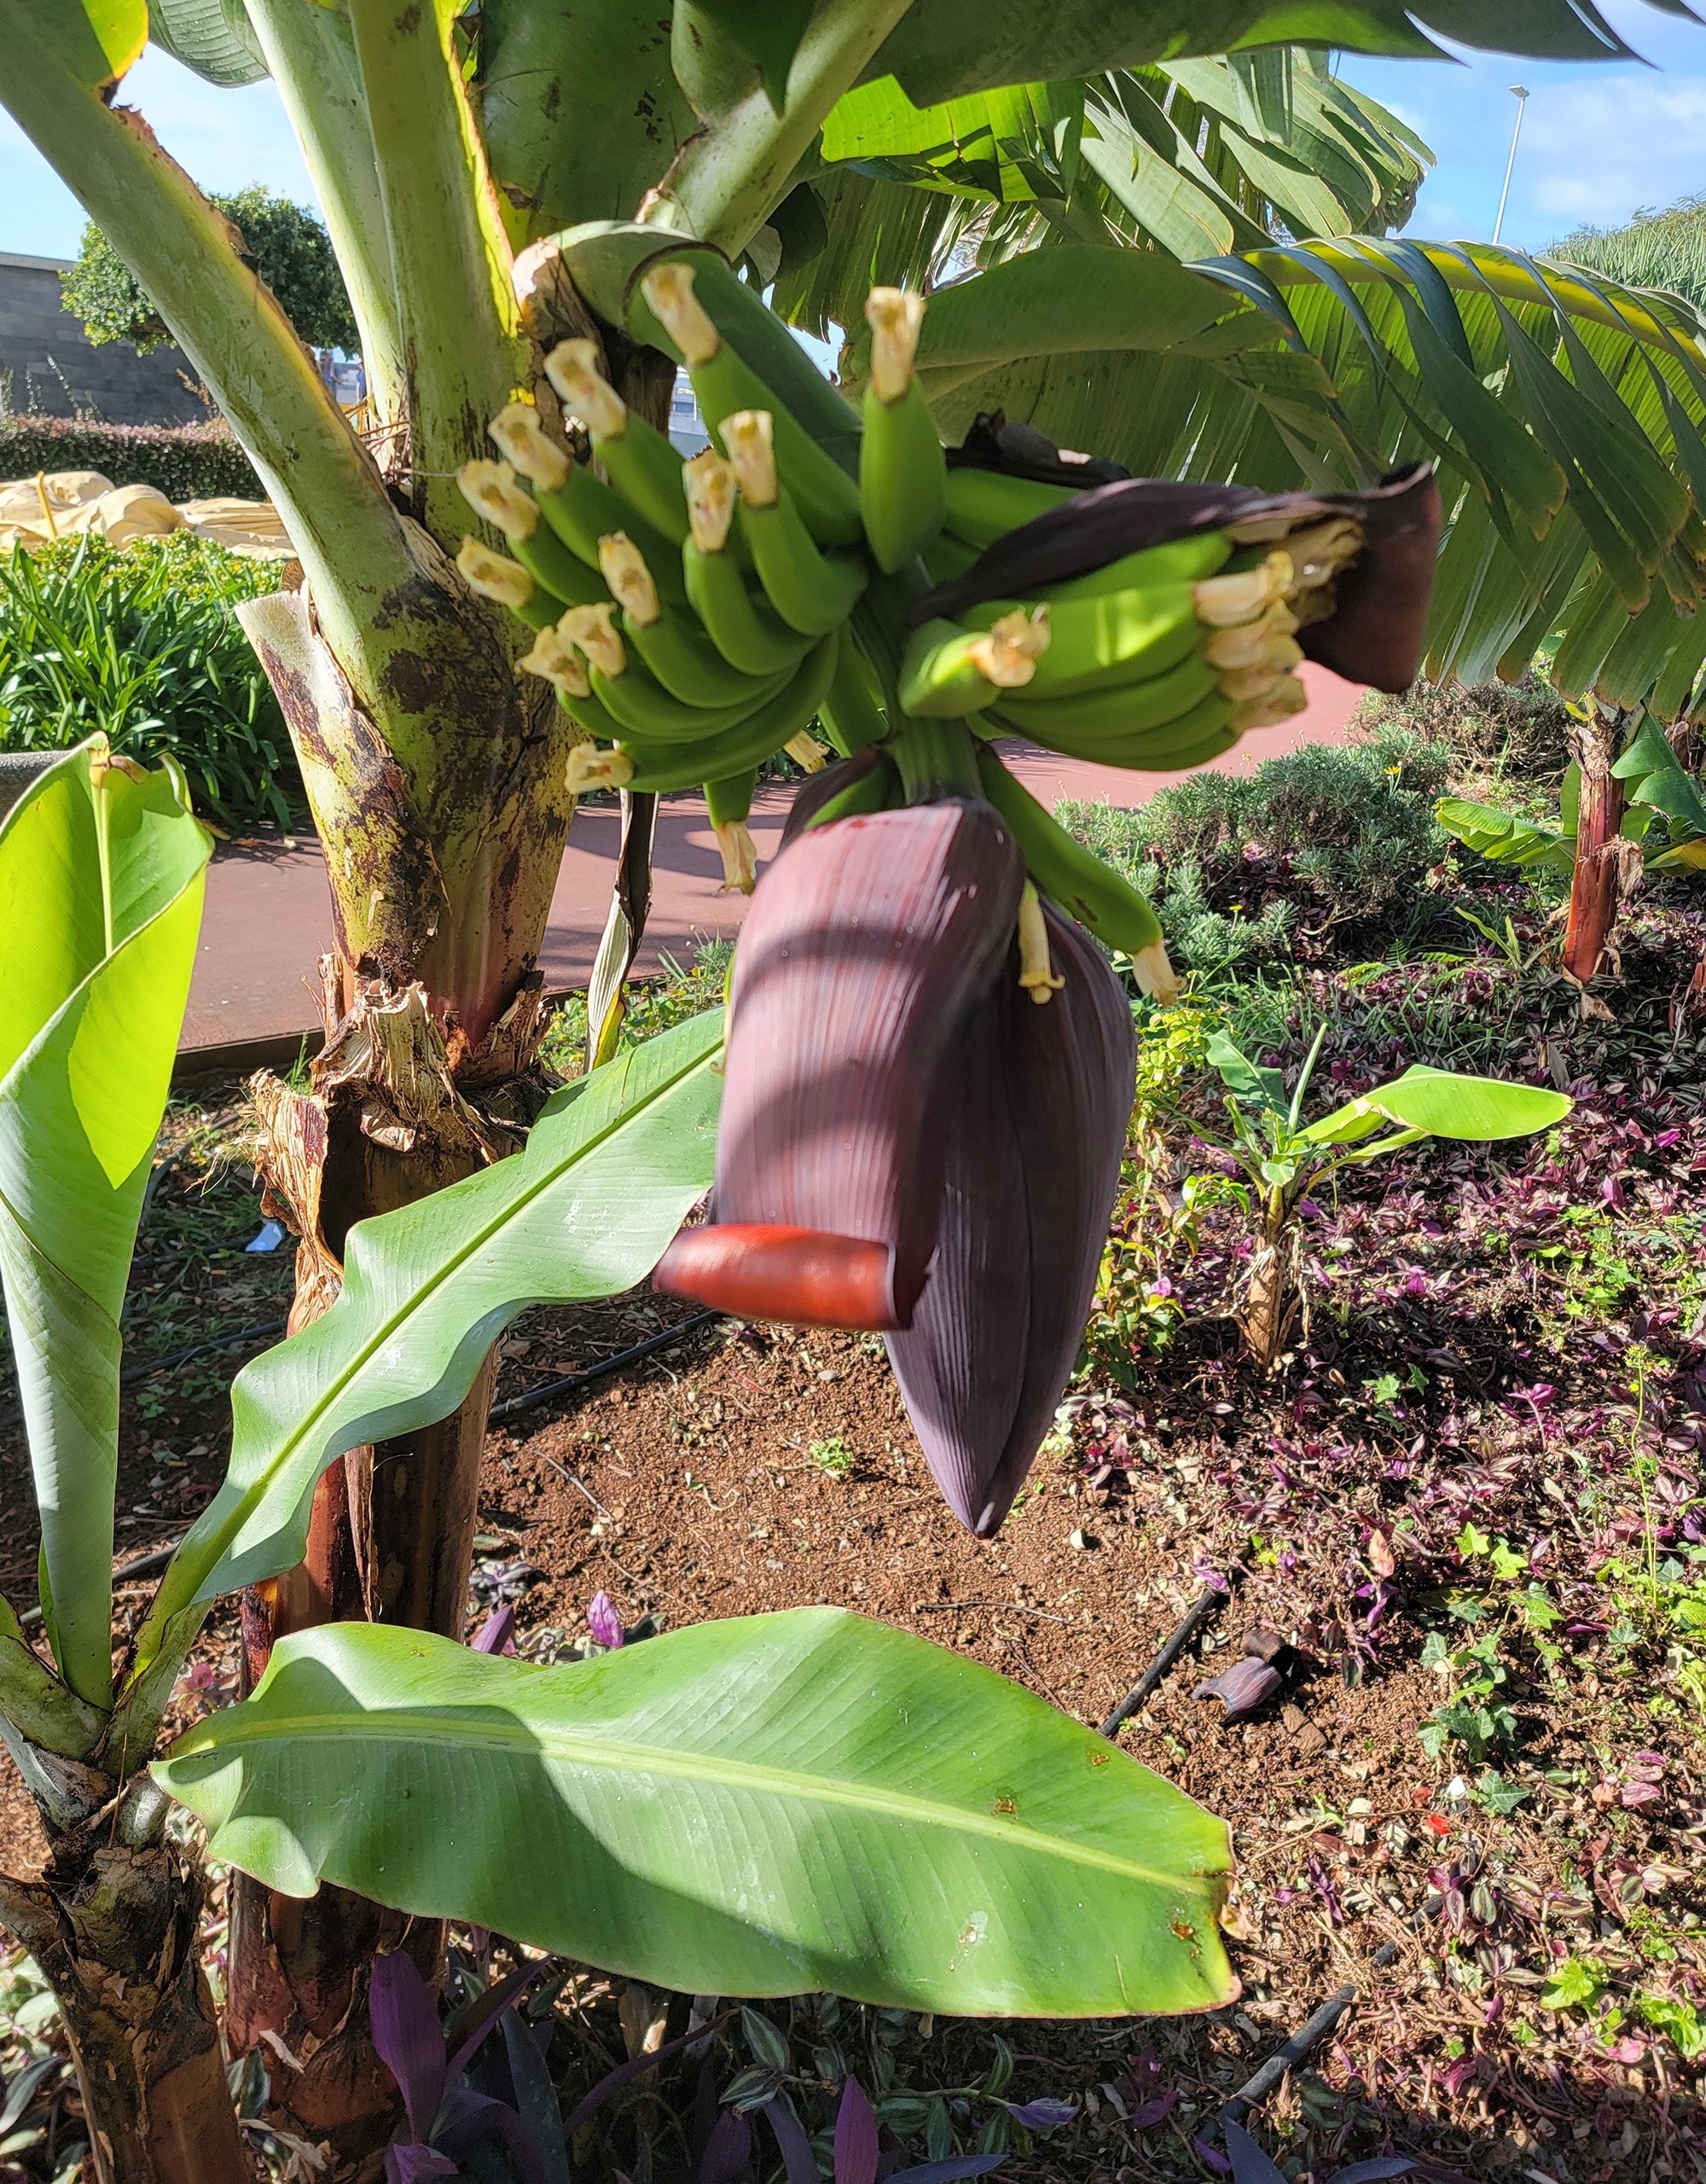 A banana tree! Cool. Madeira even has a Banana museum. I'd come to learn that Banana plantation are a big part of agriculture in the Canarys and Madeira.